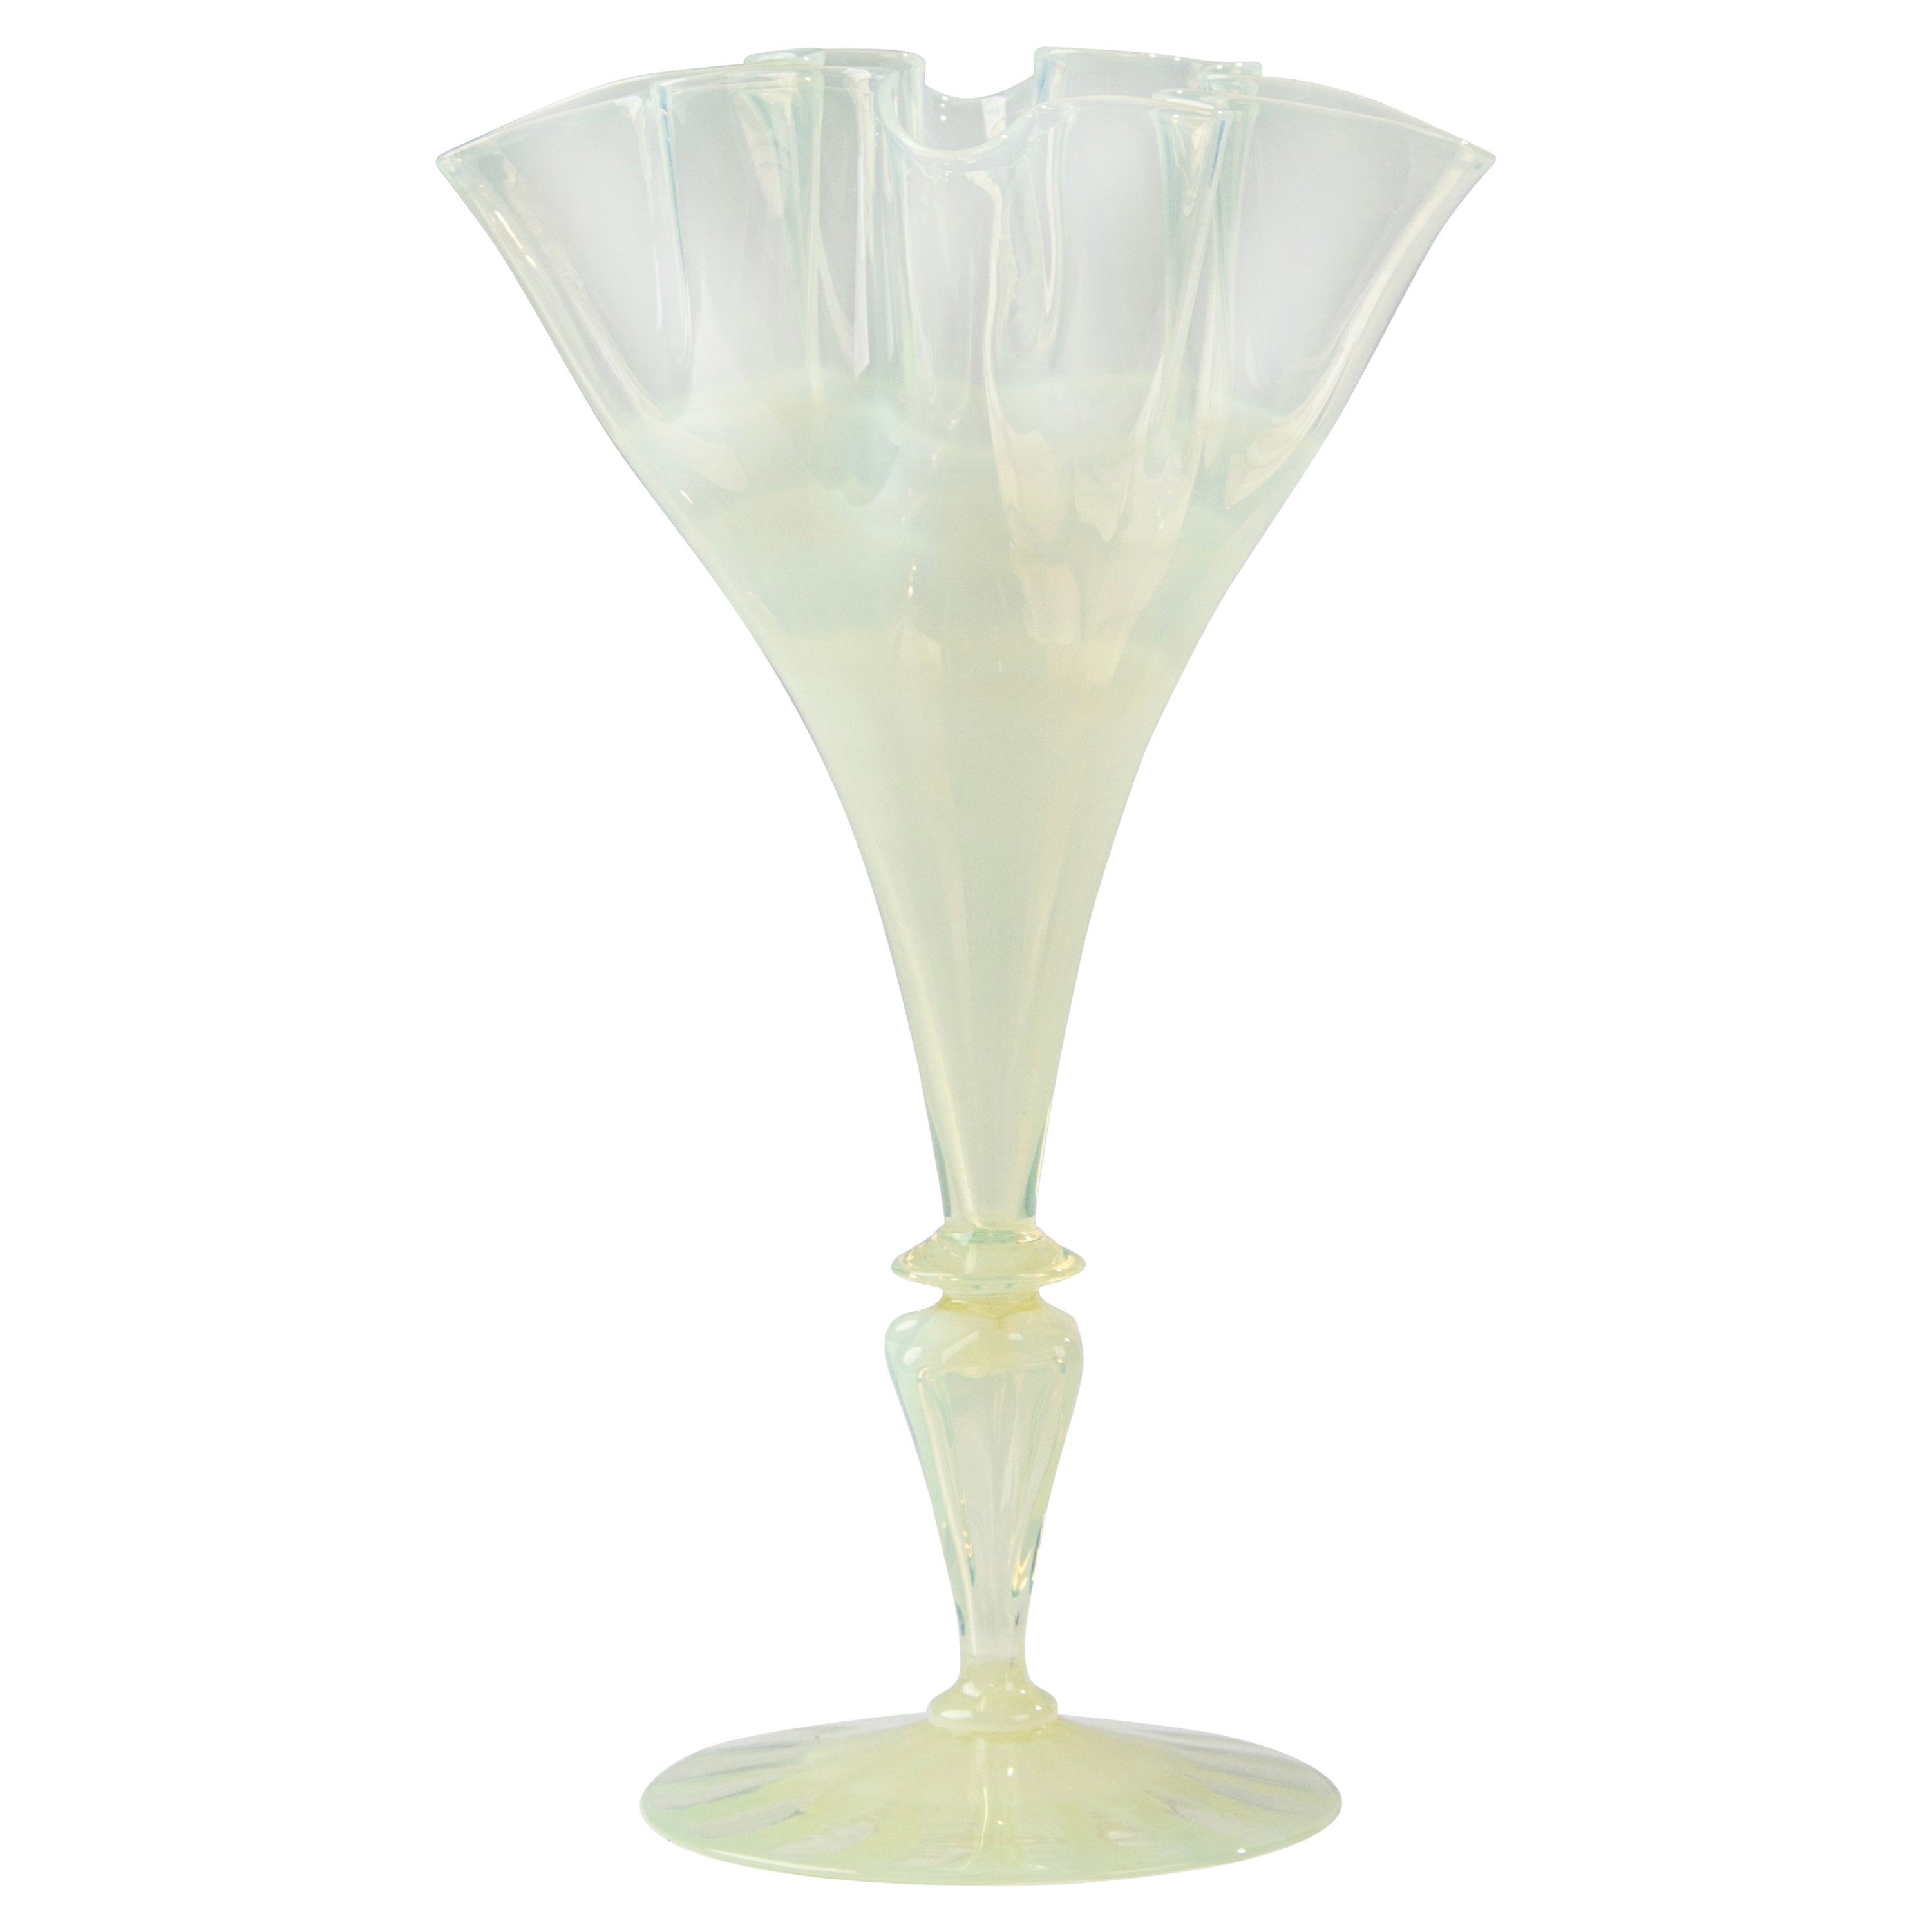 Early 19th Century, Thin Murano Glass Fan Shaped Vase For Sale